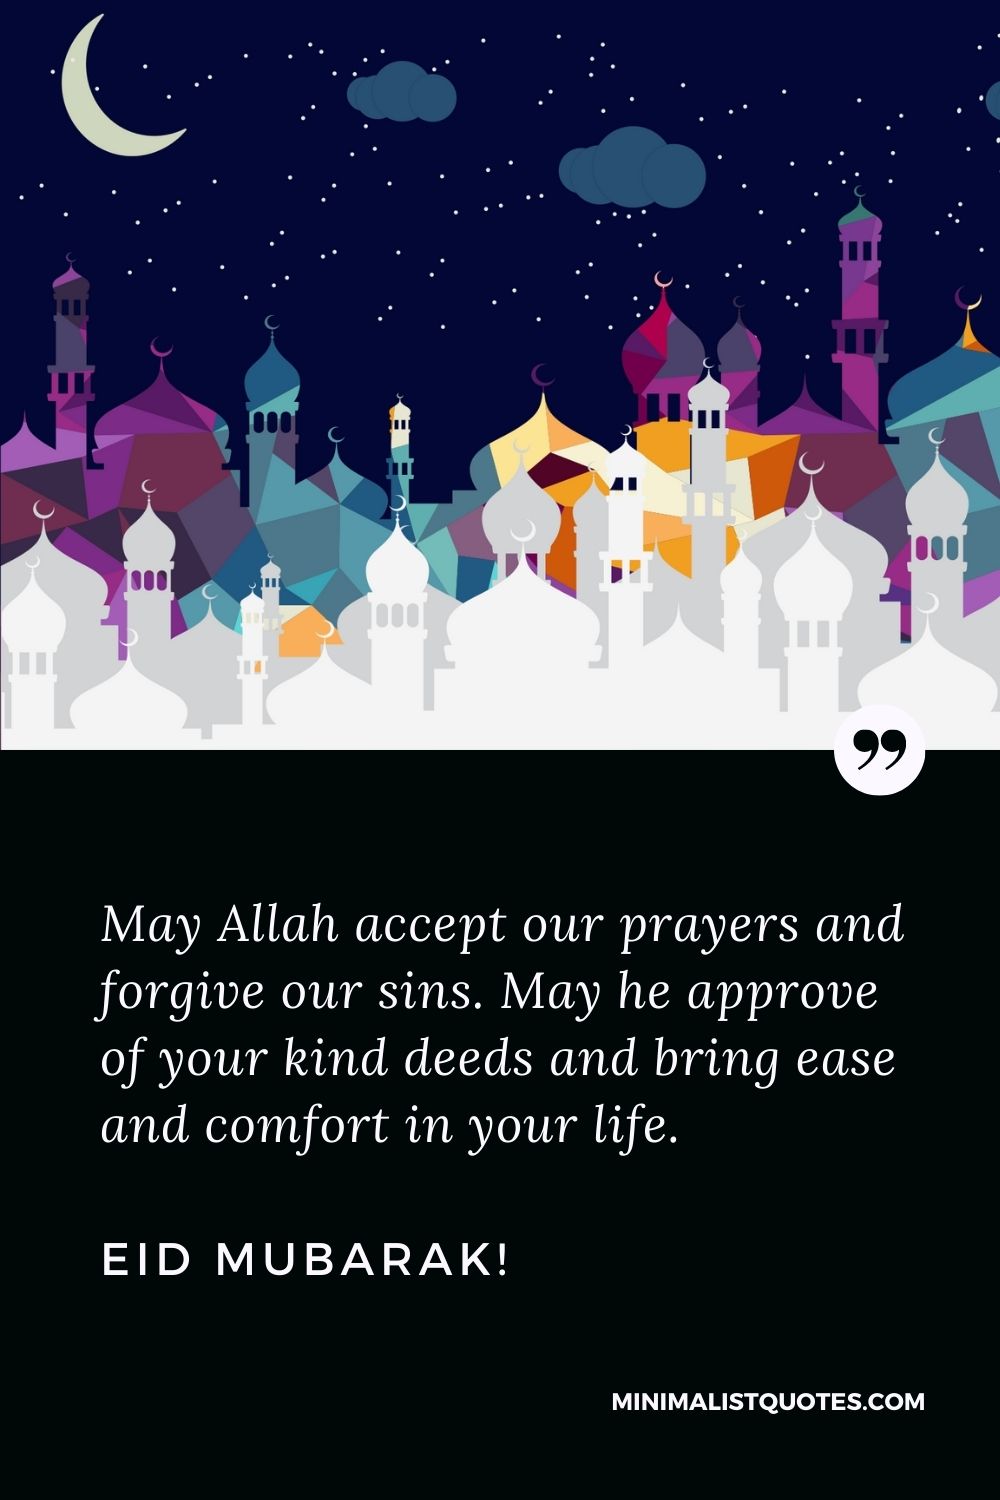 Eid Quote, Wish & Message With Image: May Allah accept our prayers and forgive our sins. May he approve of your kind deeds and bring ease and comfort in your life. Eid Mubarak!